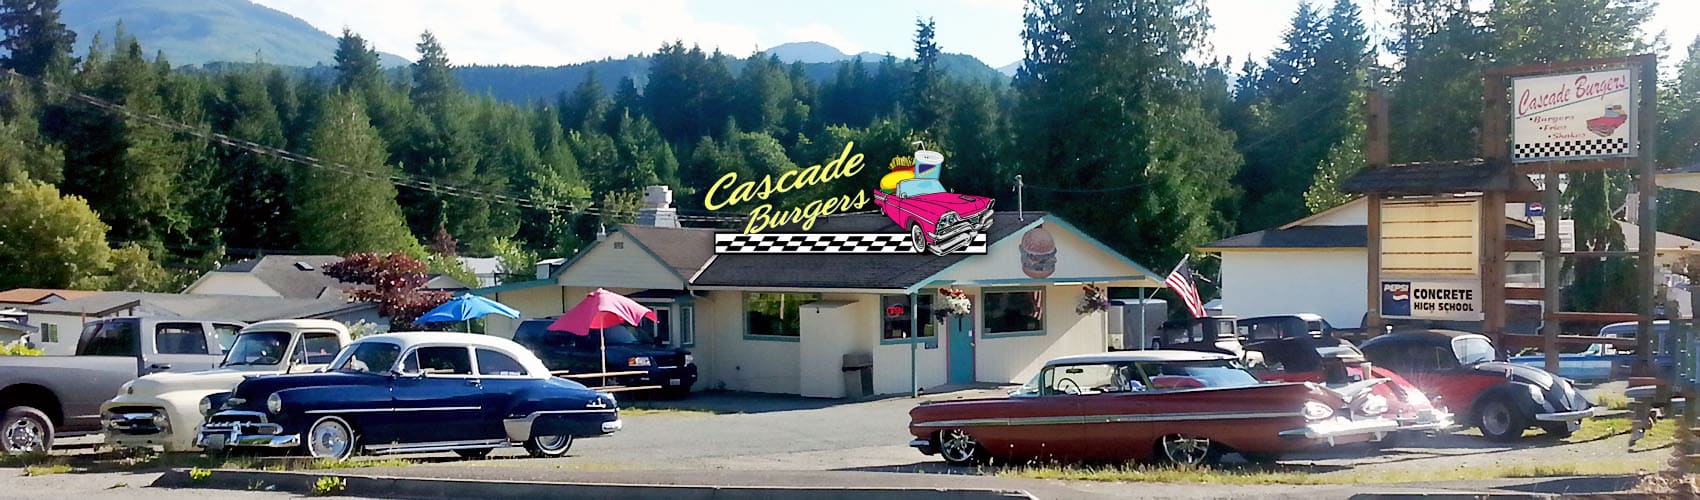 Cascade Burgers outside with logo